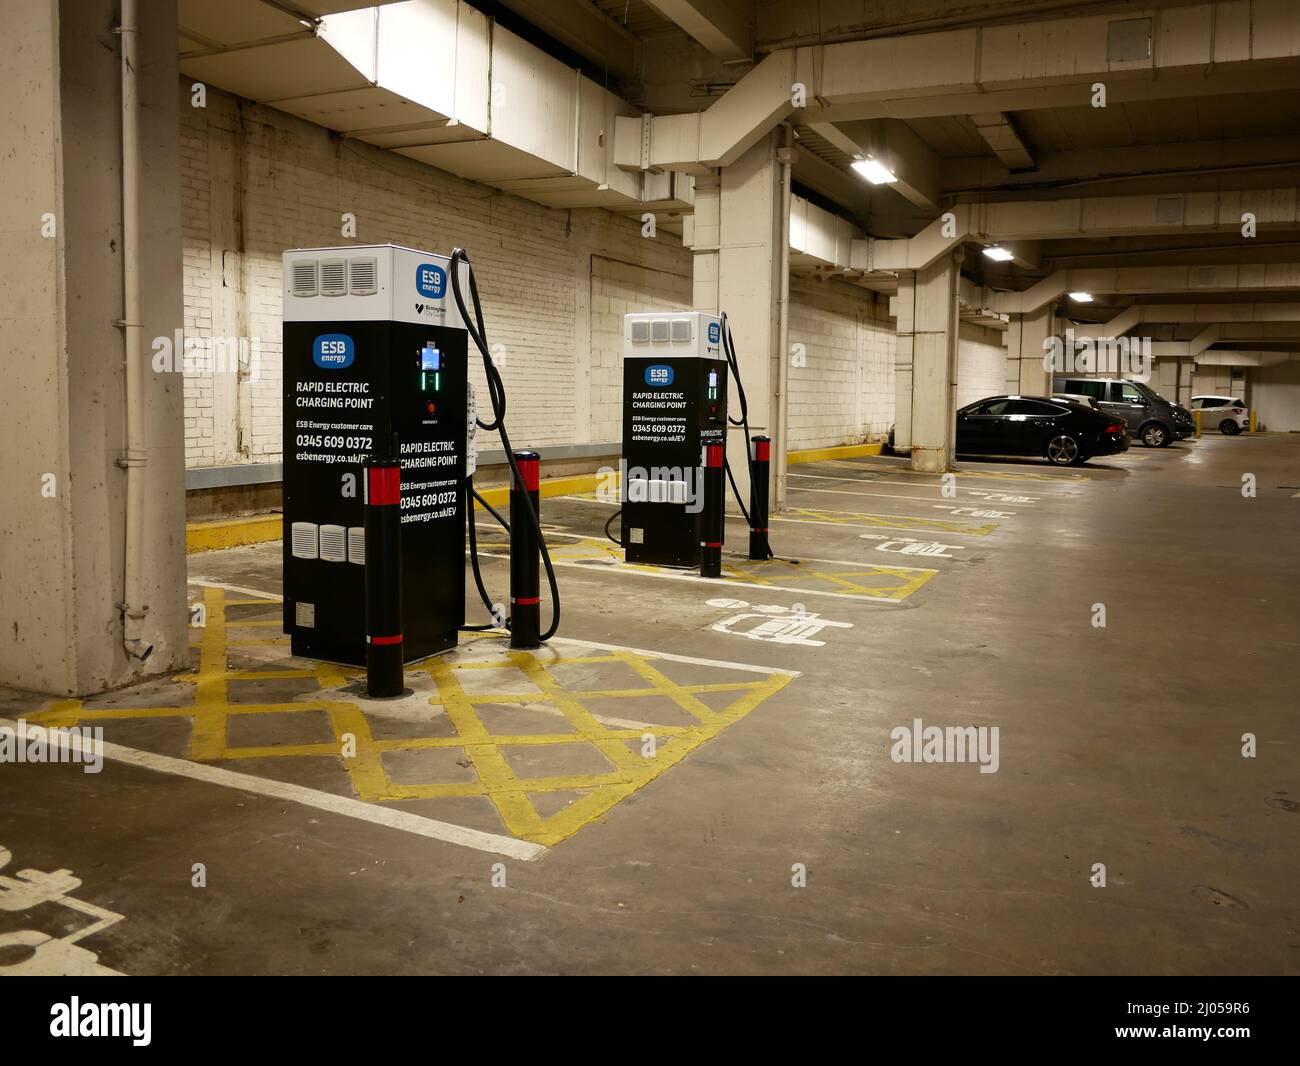 Electric car charging points in a city car park Stock Photo